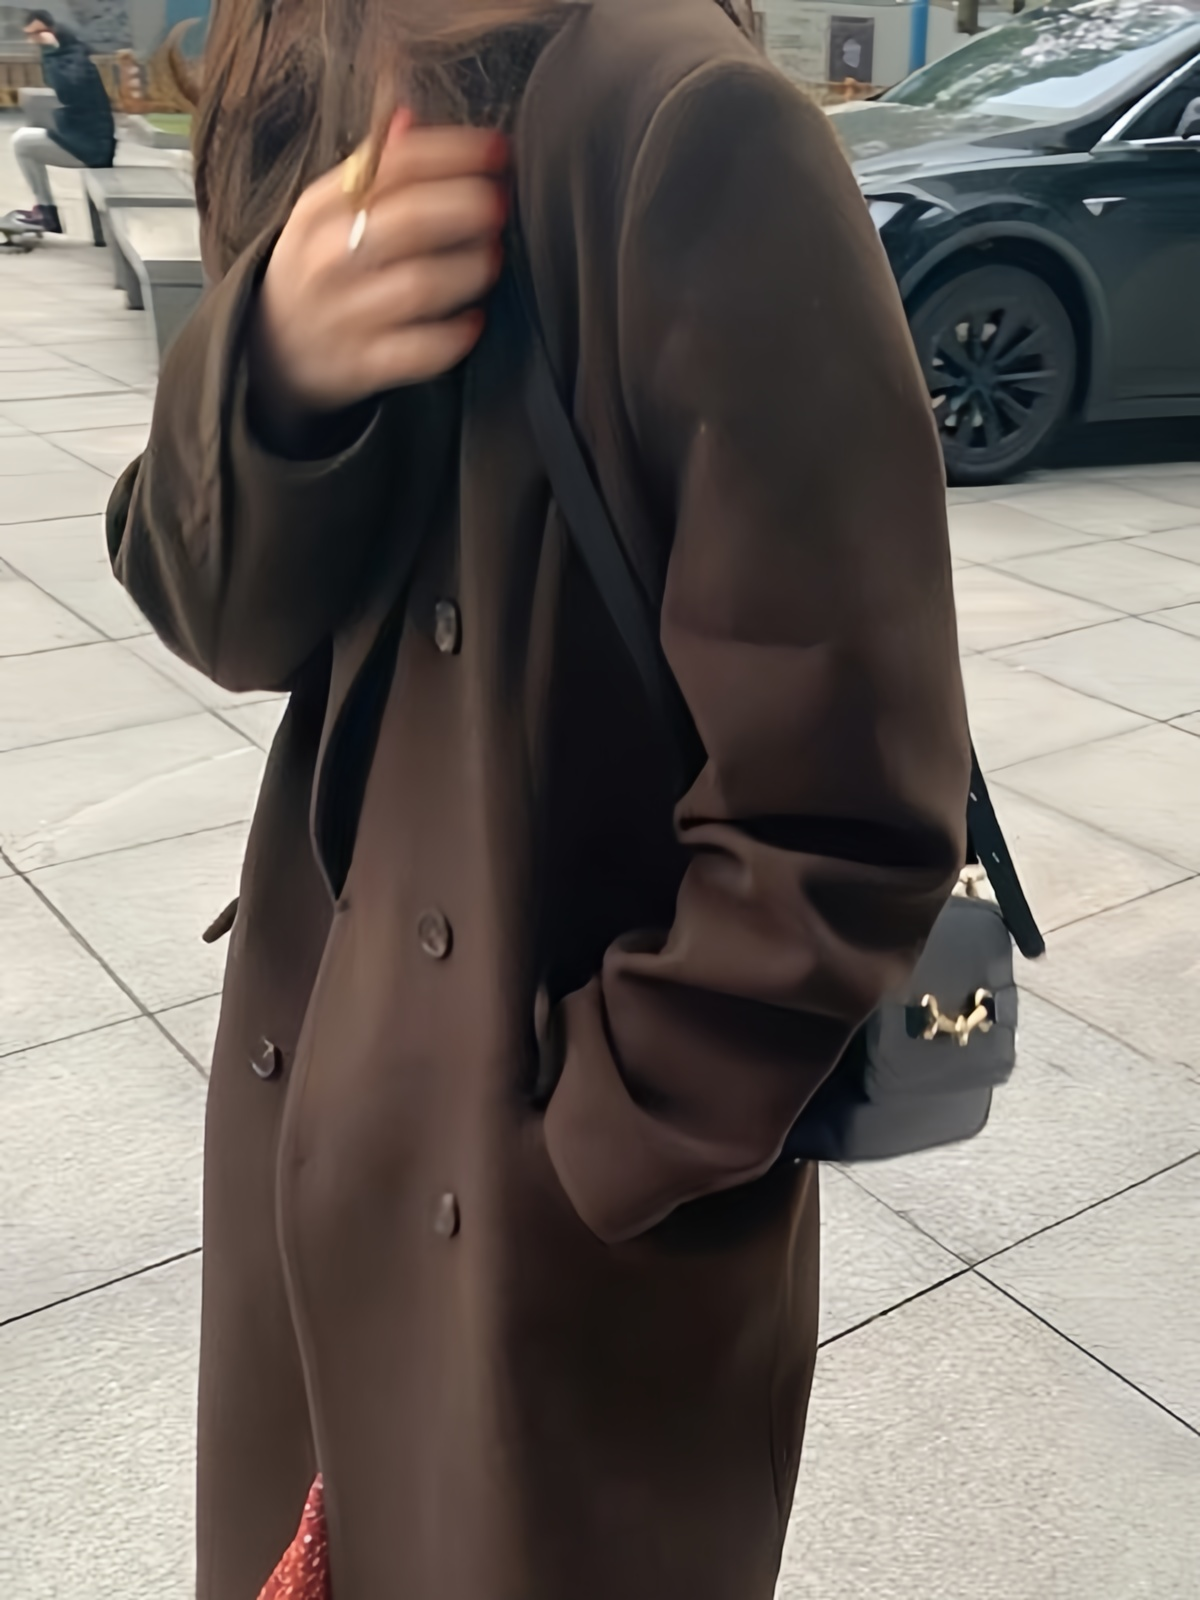 Brown vintage coat with lapel collar